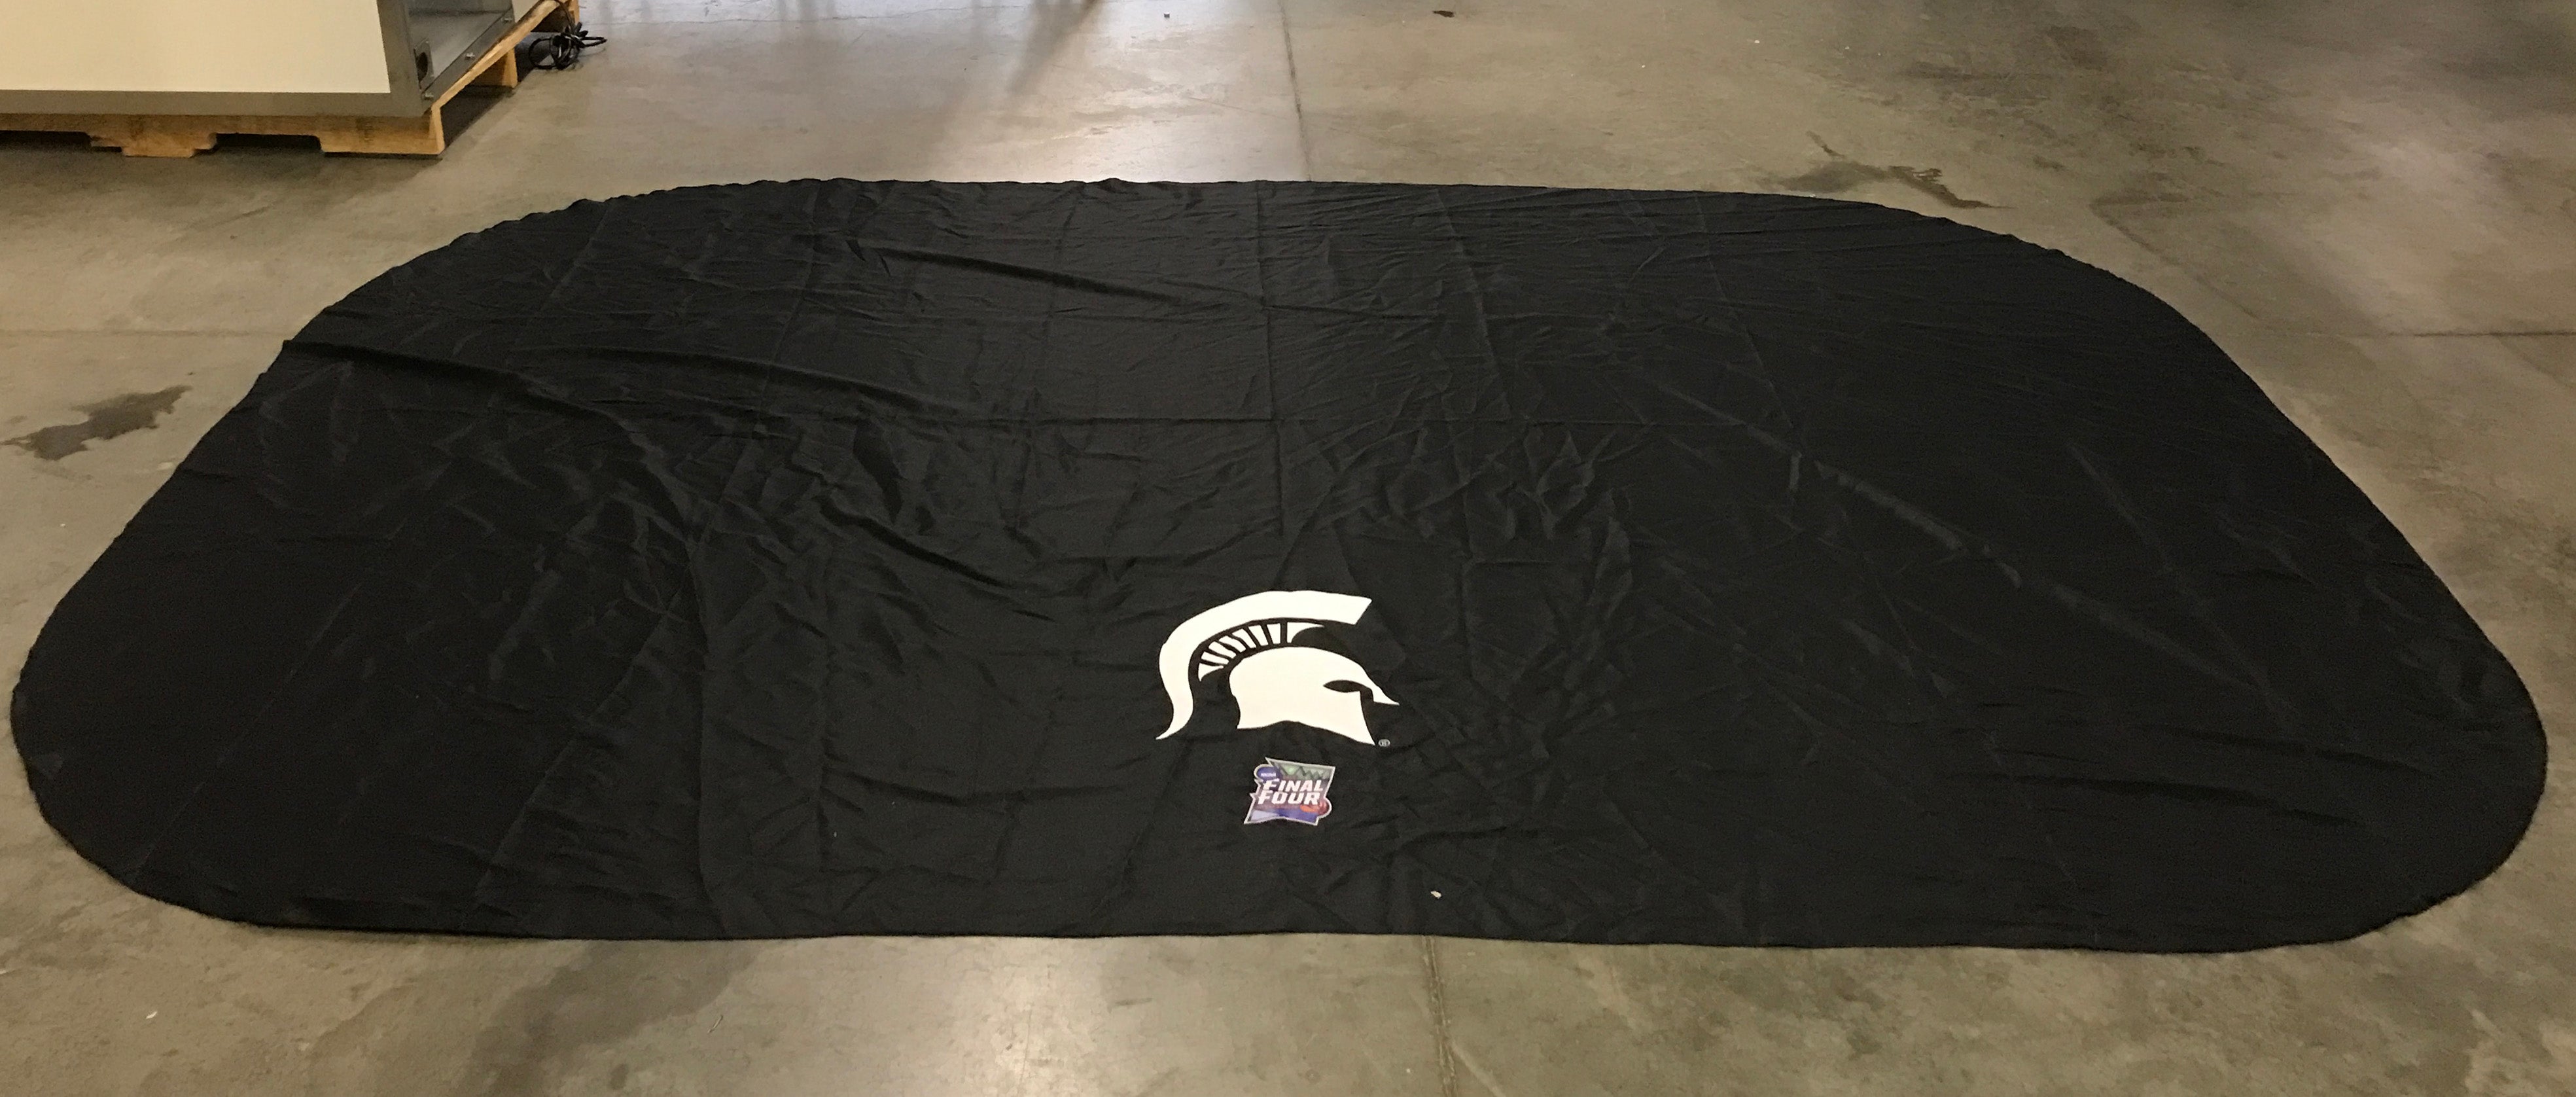 Black Final Four Table Cover